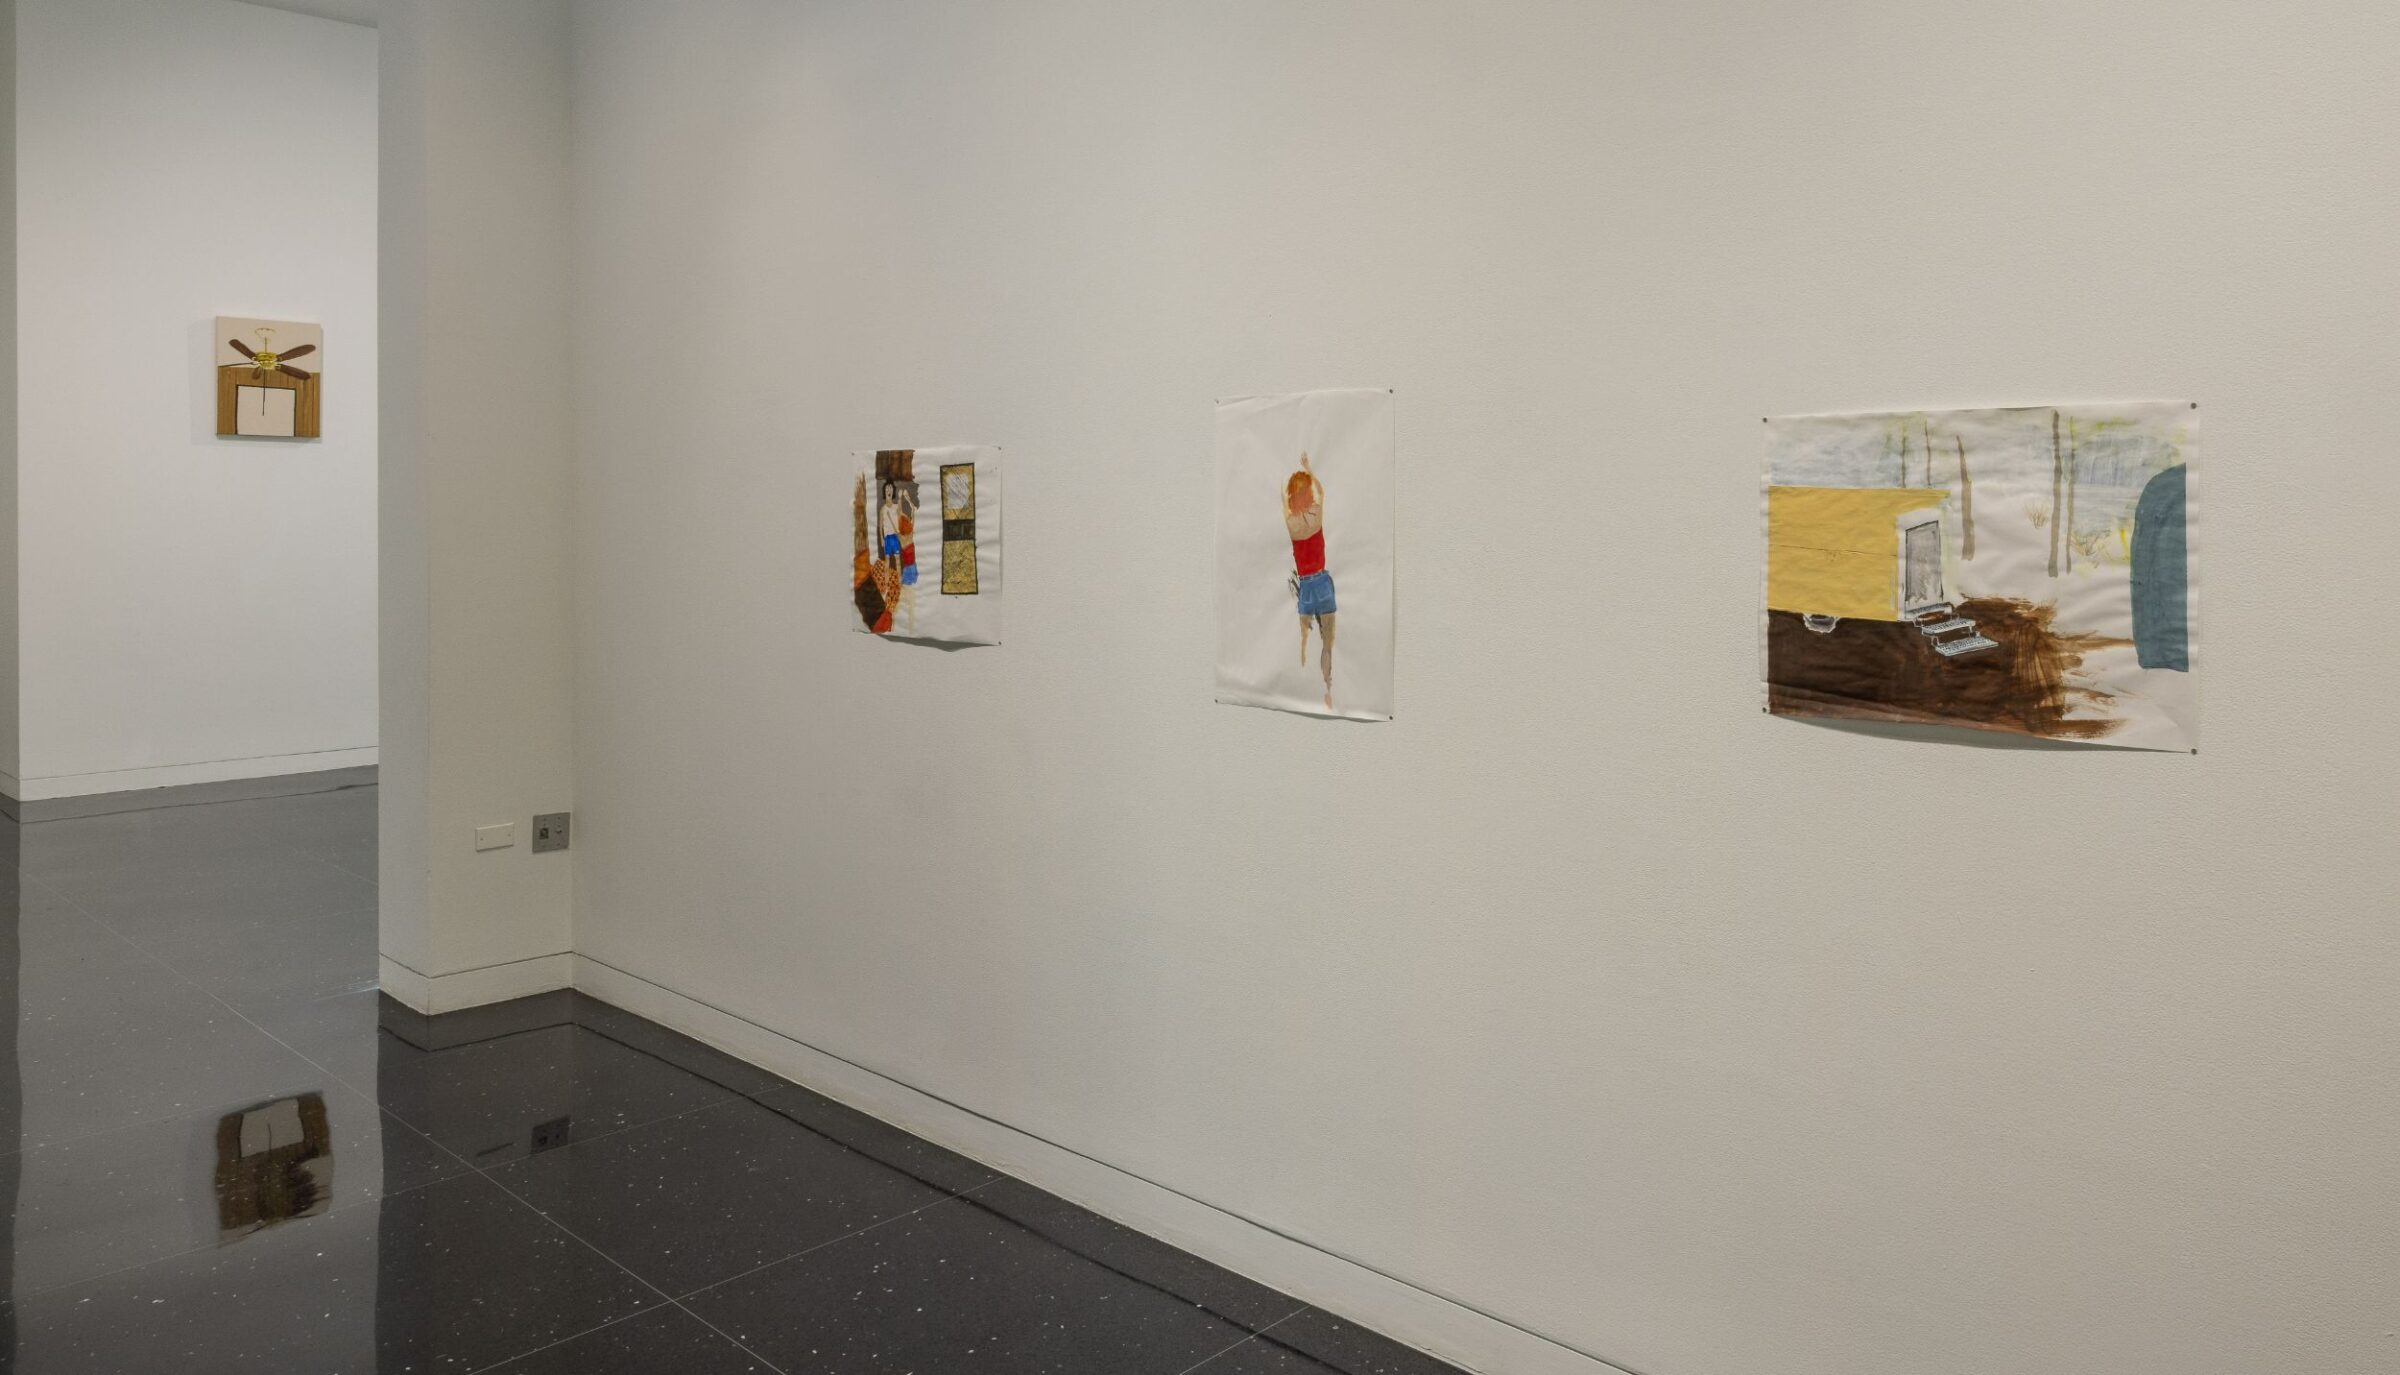 Three drawings arranged in a line on a white gallery wall. In the middle drawing is the figure of a woman in a red tube top and jean shorts.